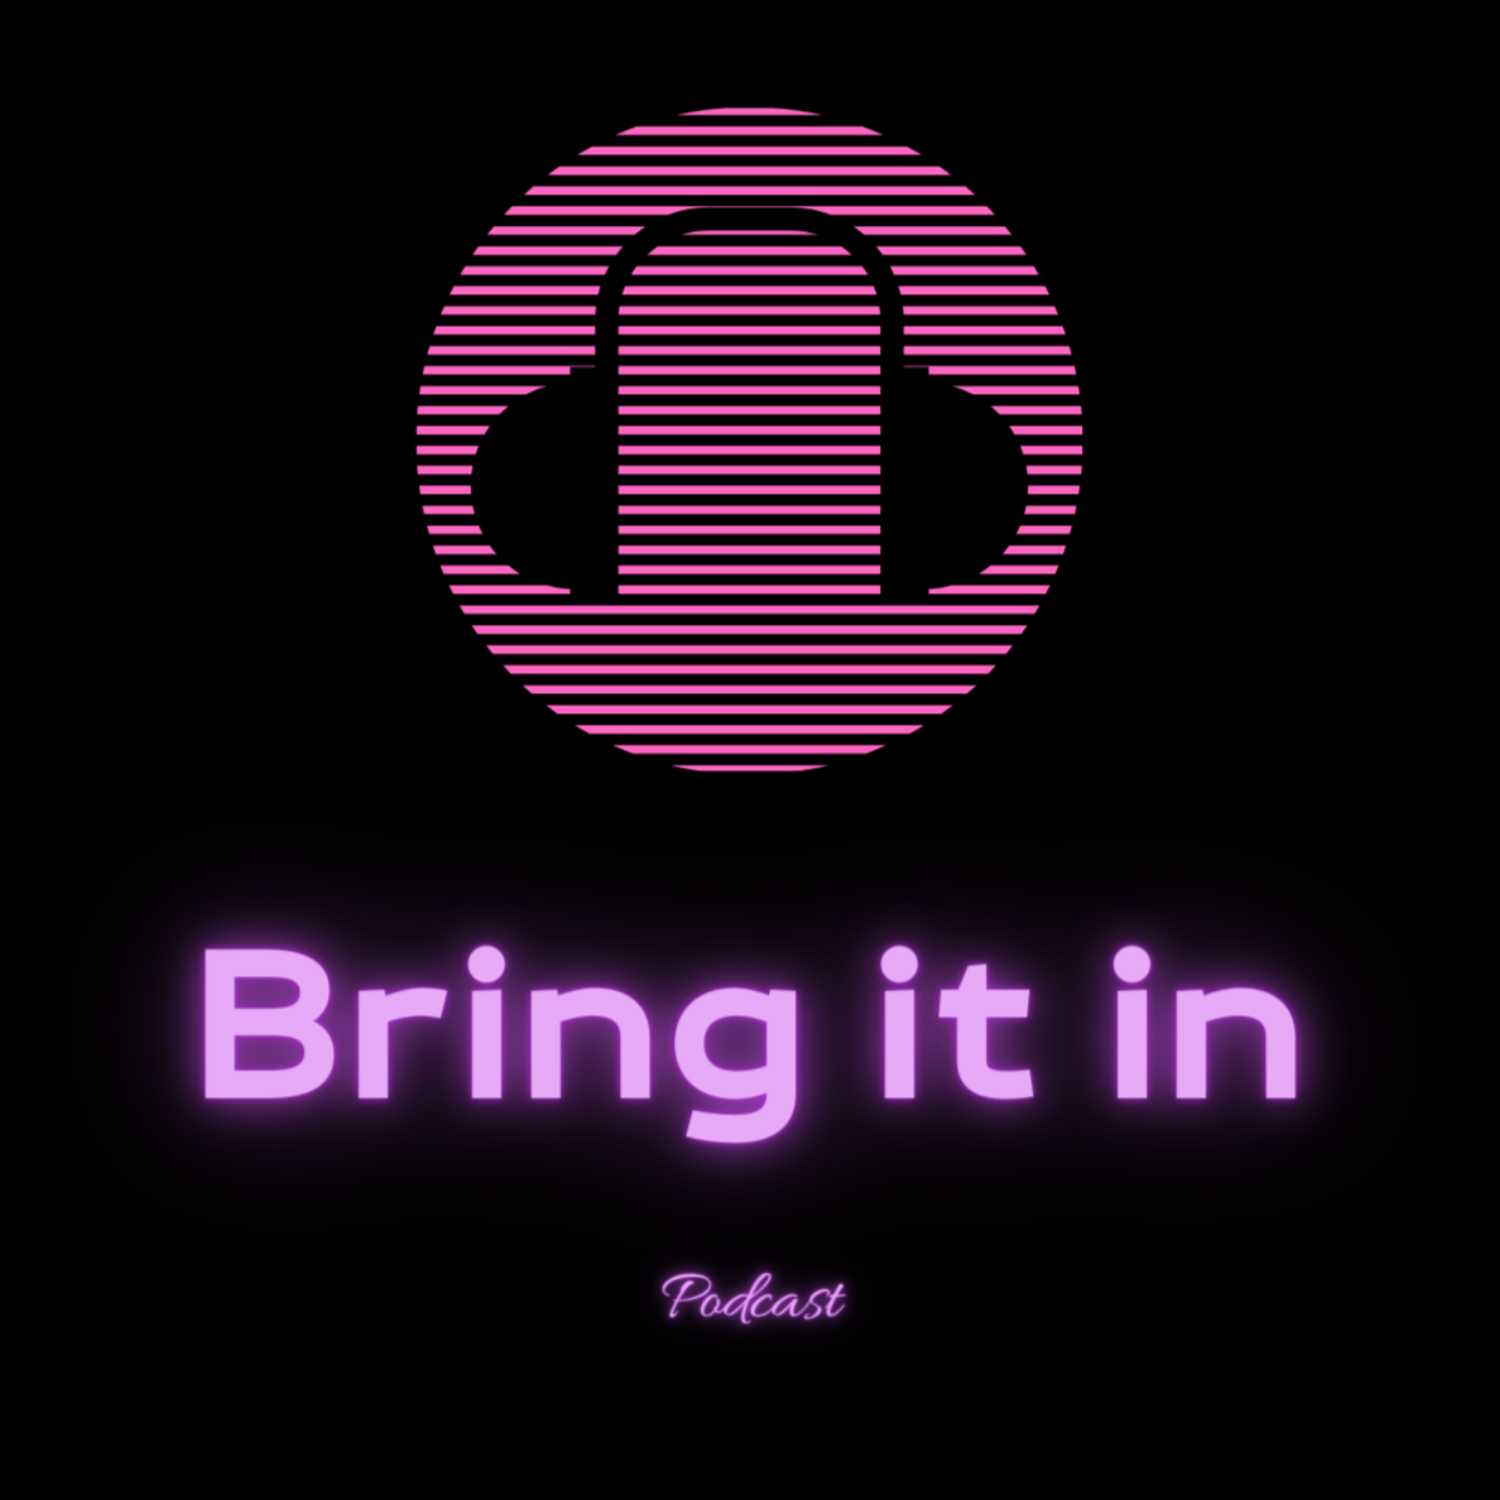 Bring it in Podcast